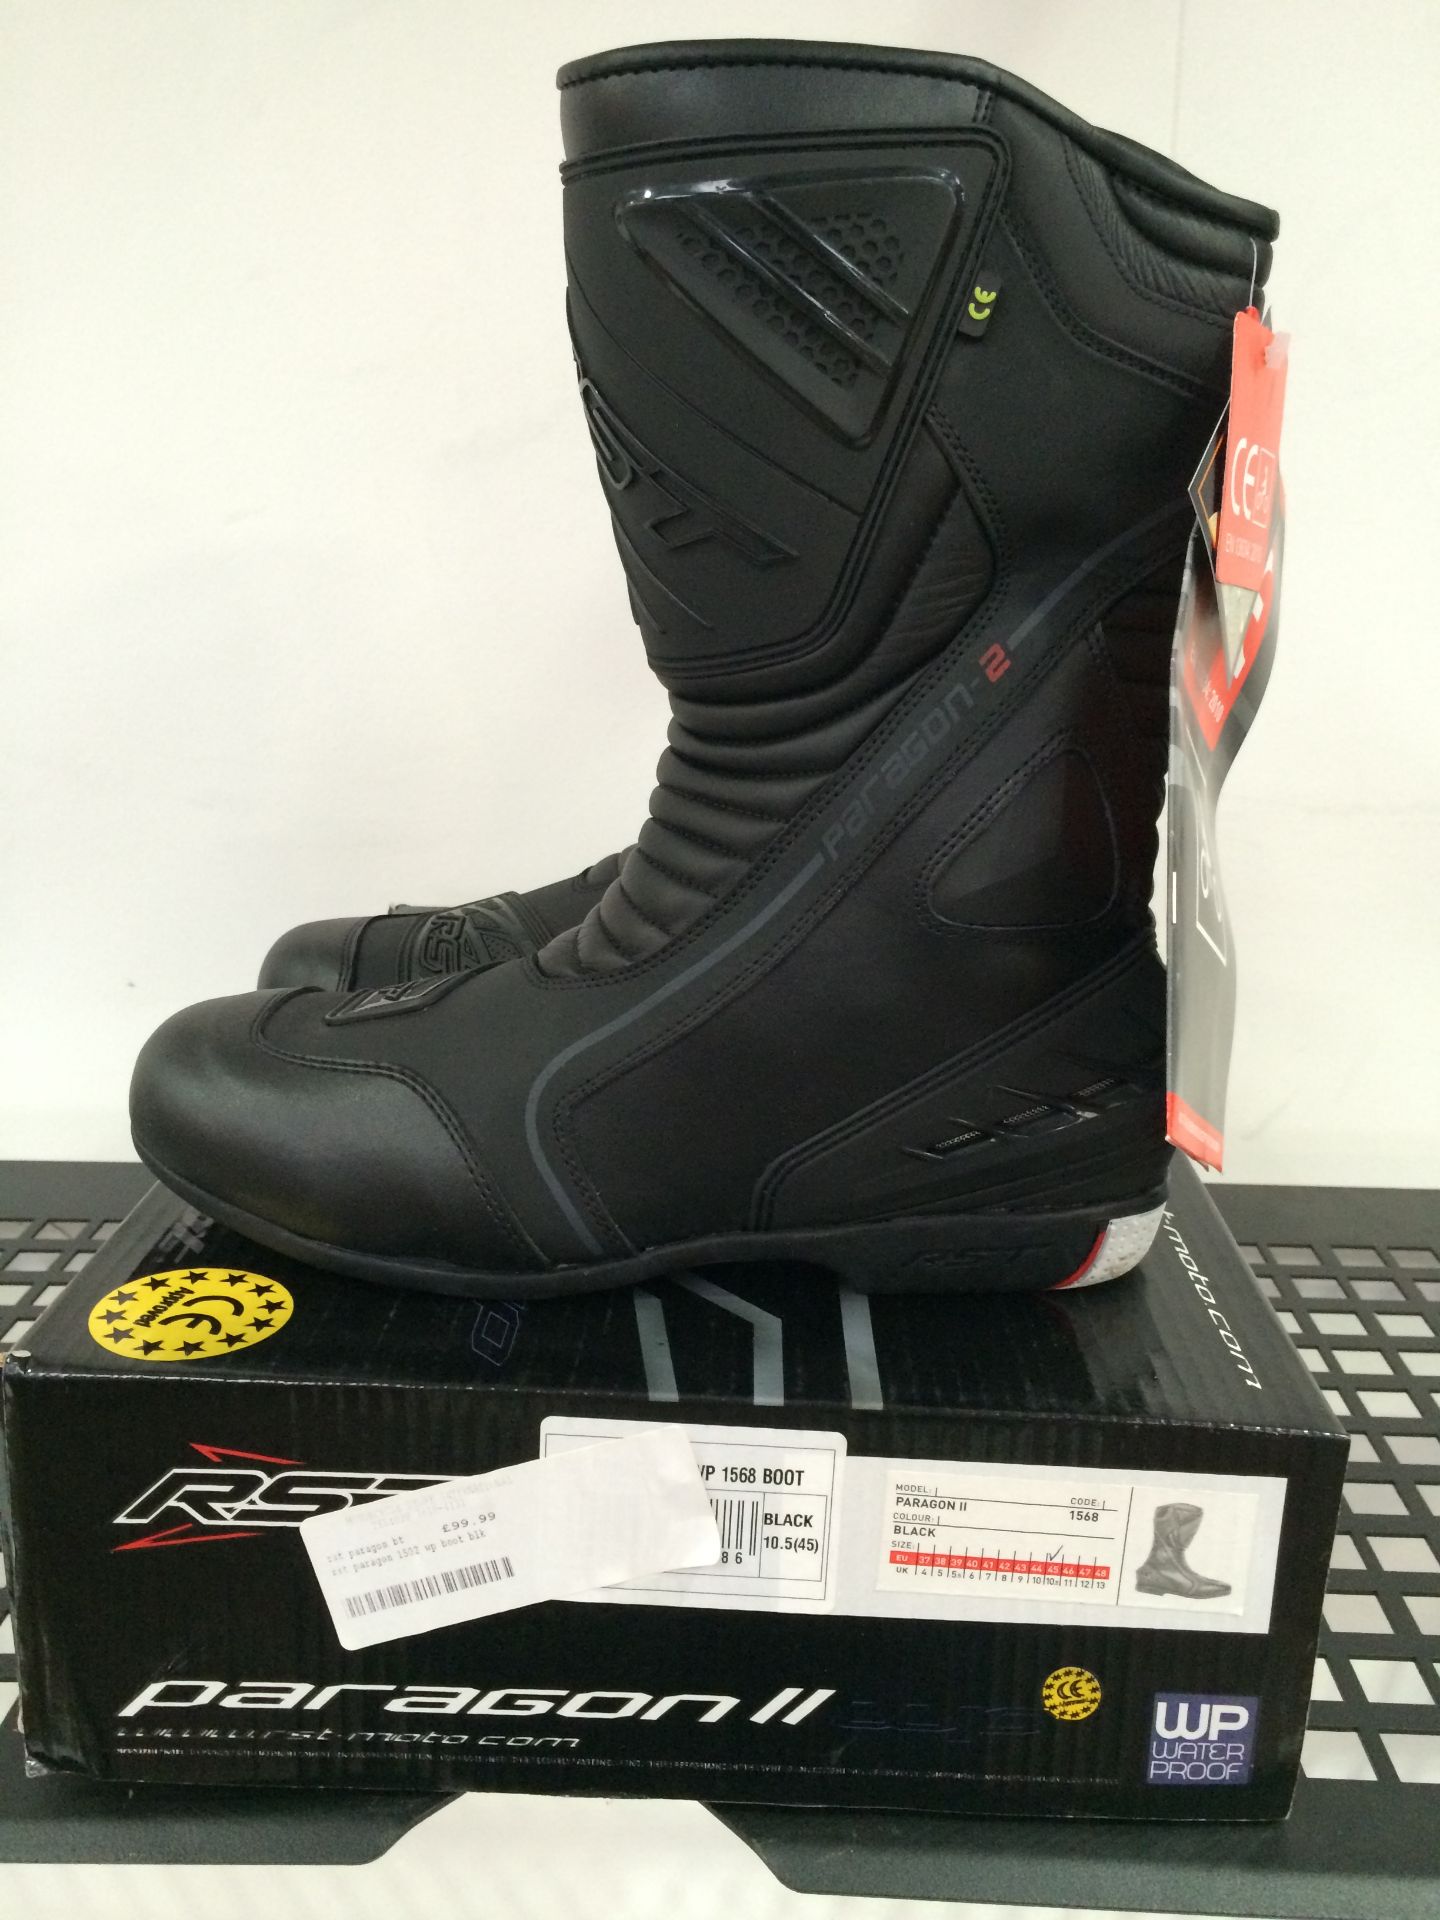 RST Paragon II 1568 Boot. Size UK 10.5 (45)